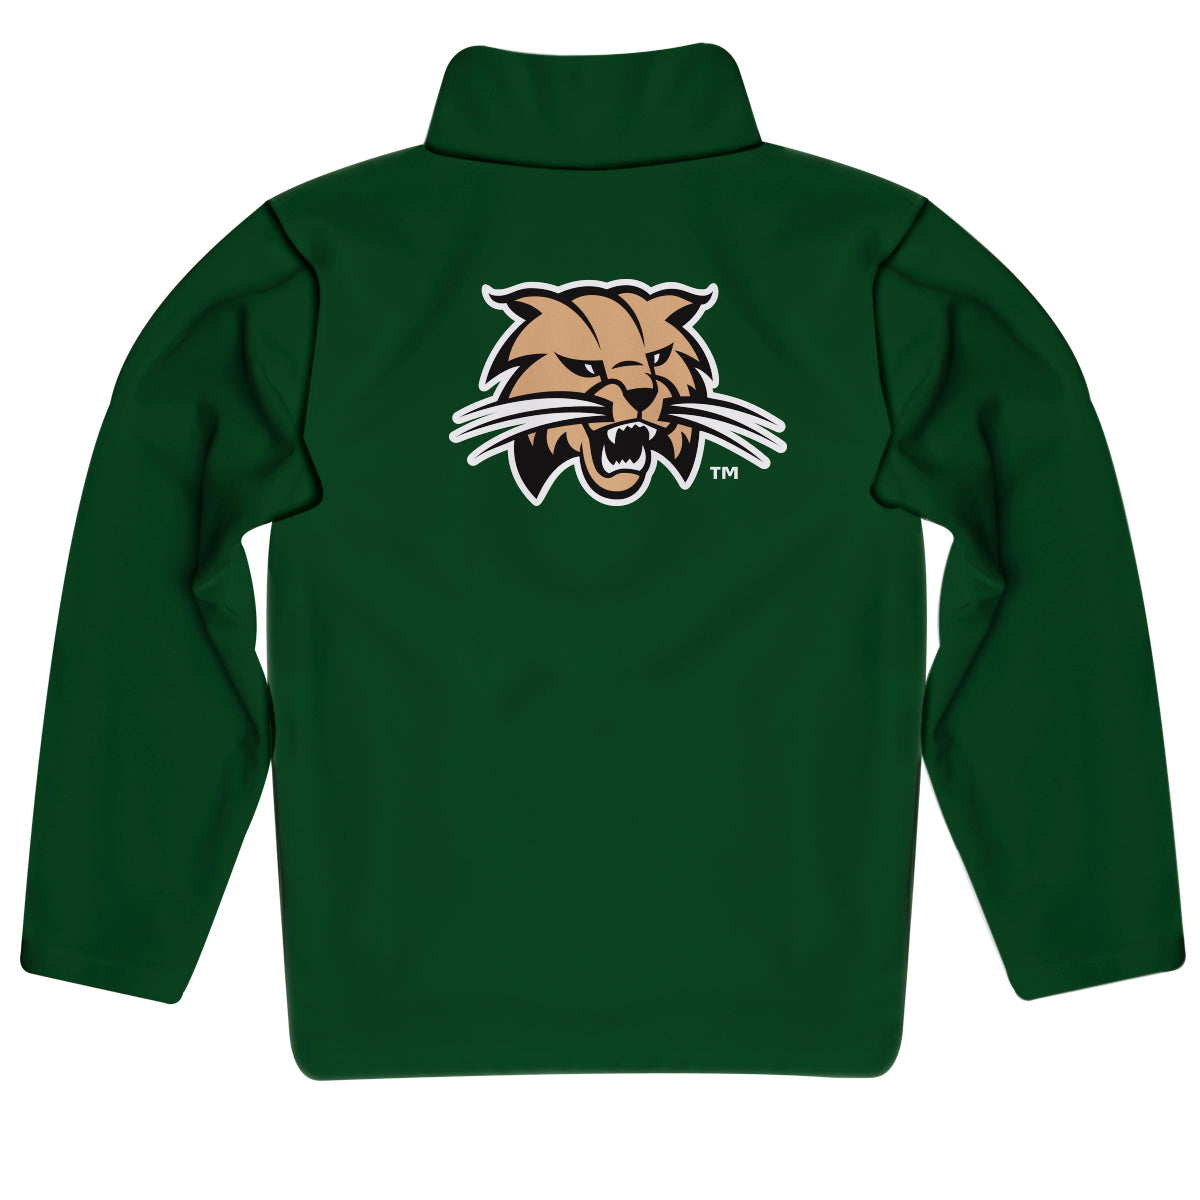 Ohio Bobcats Game Day Solid Green Quarter Zip Pullover for Infants Toddlers by Vive La Fete